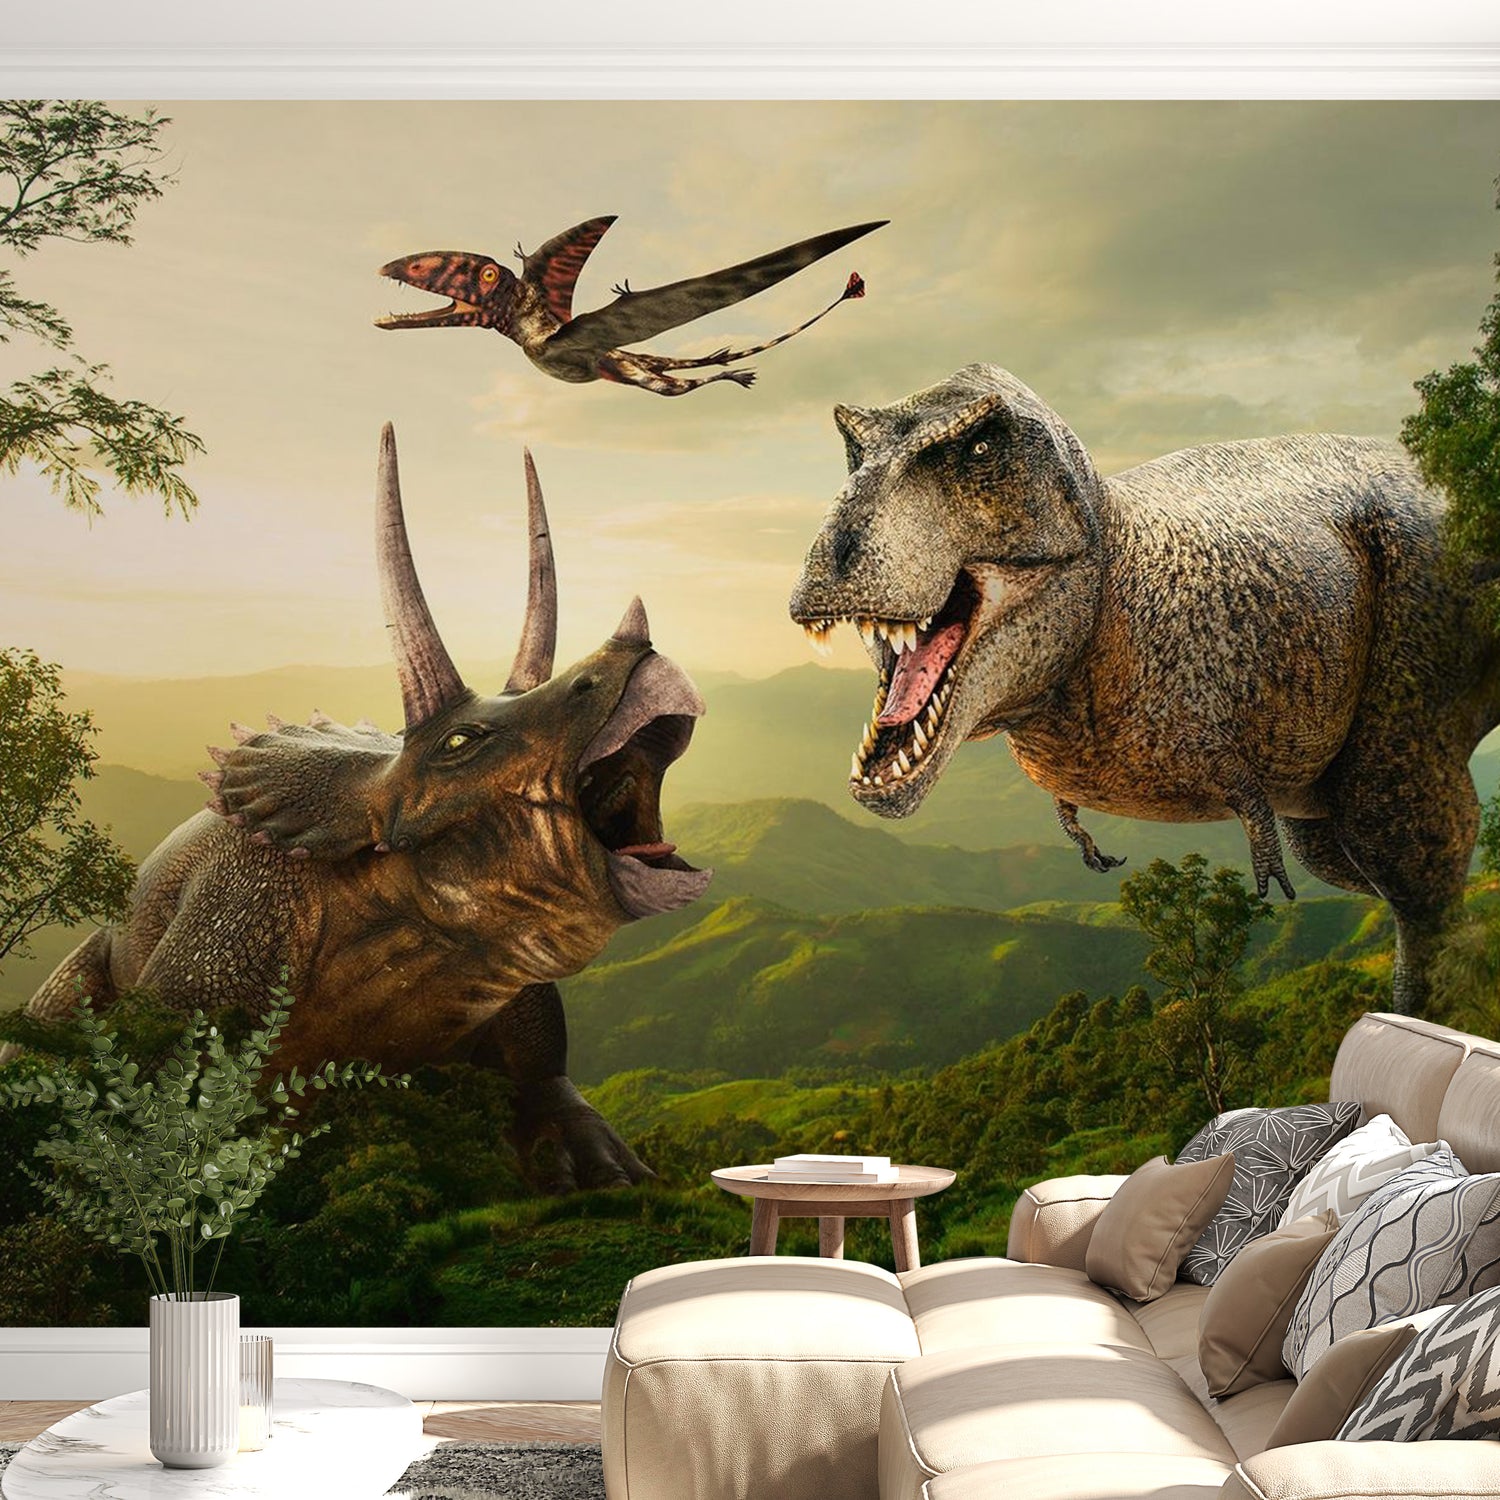 Peel & Stick Fiction Wall Mural - Dinosaur Square - Removable Wall Decals